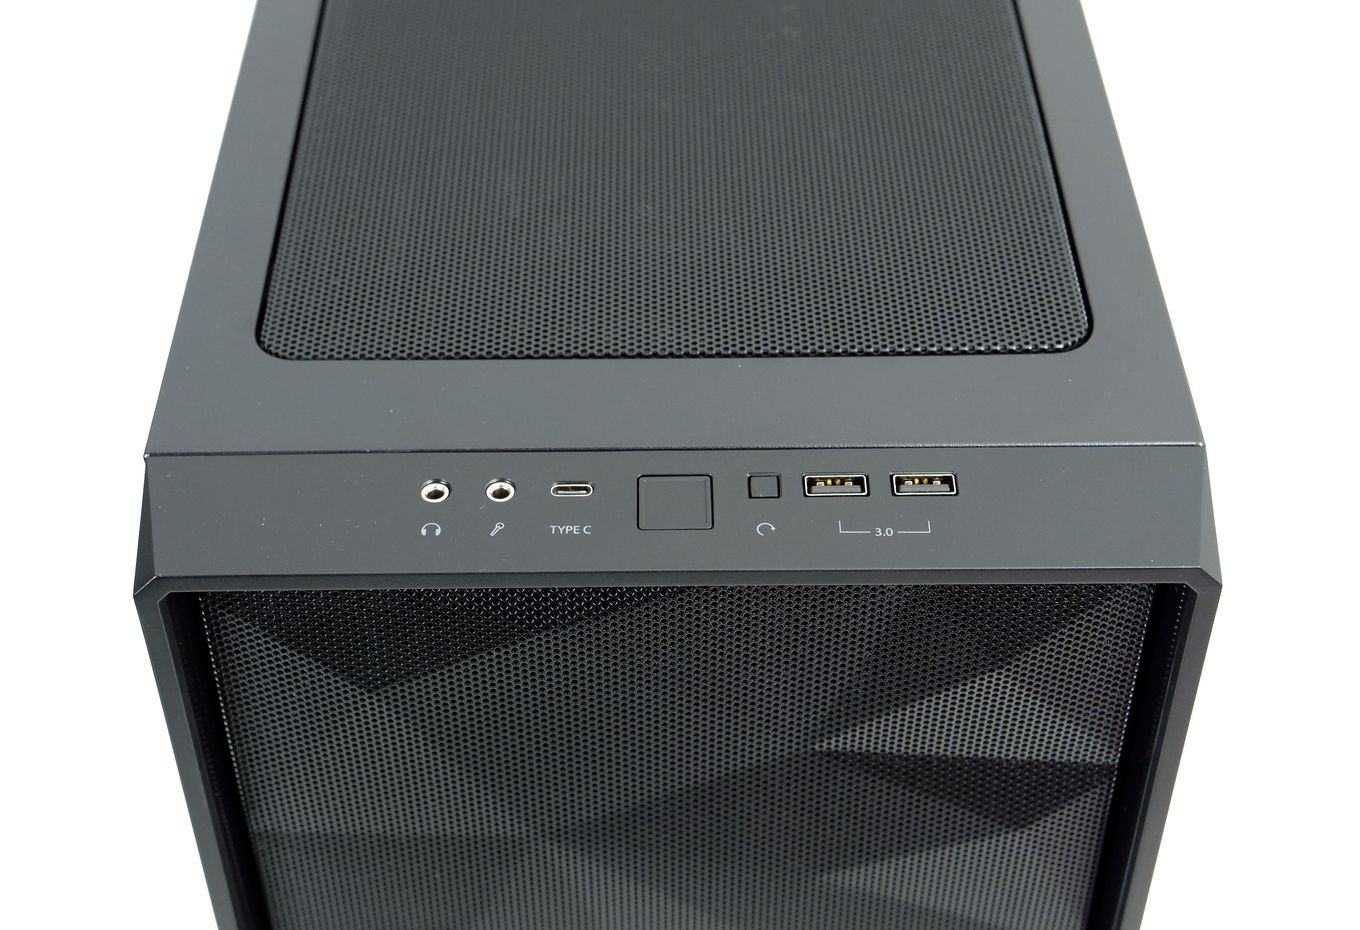 Fractal design meshify c mini -compact mini tower computer case -matx layout -airflow/cooling -2x fans included -psu shroud -modular interior -water-cooling ready -usb3.0 -tempered glass -blackout